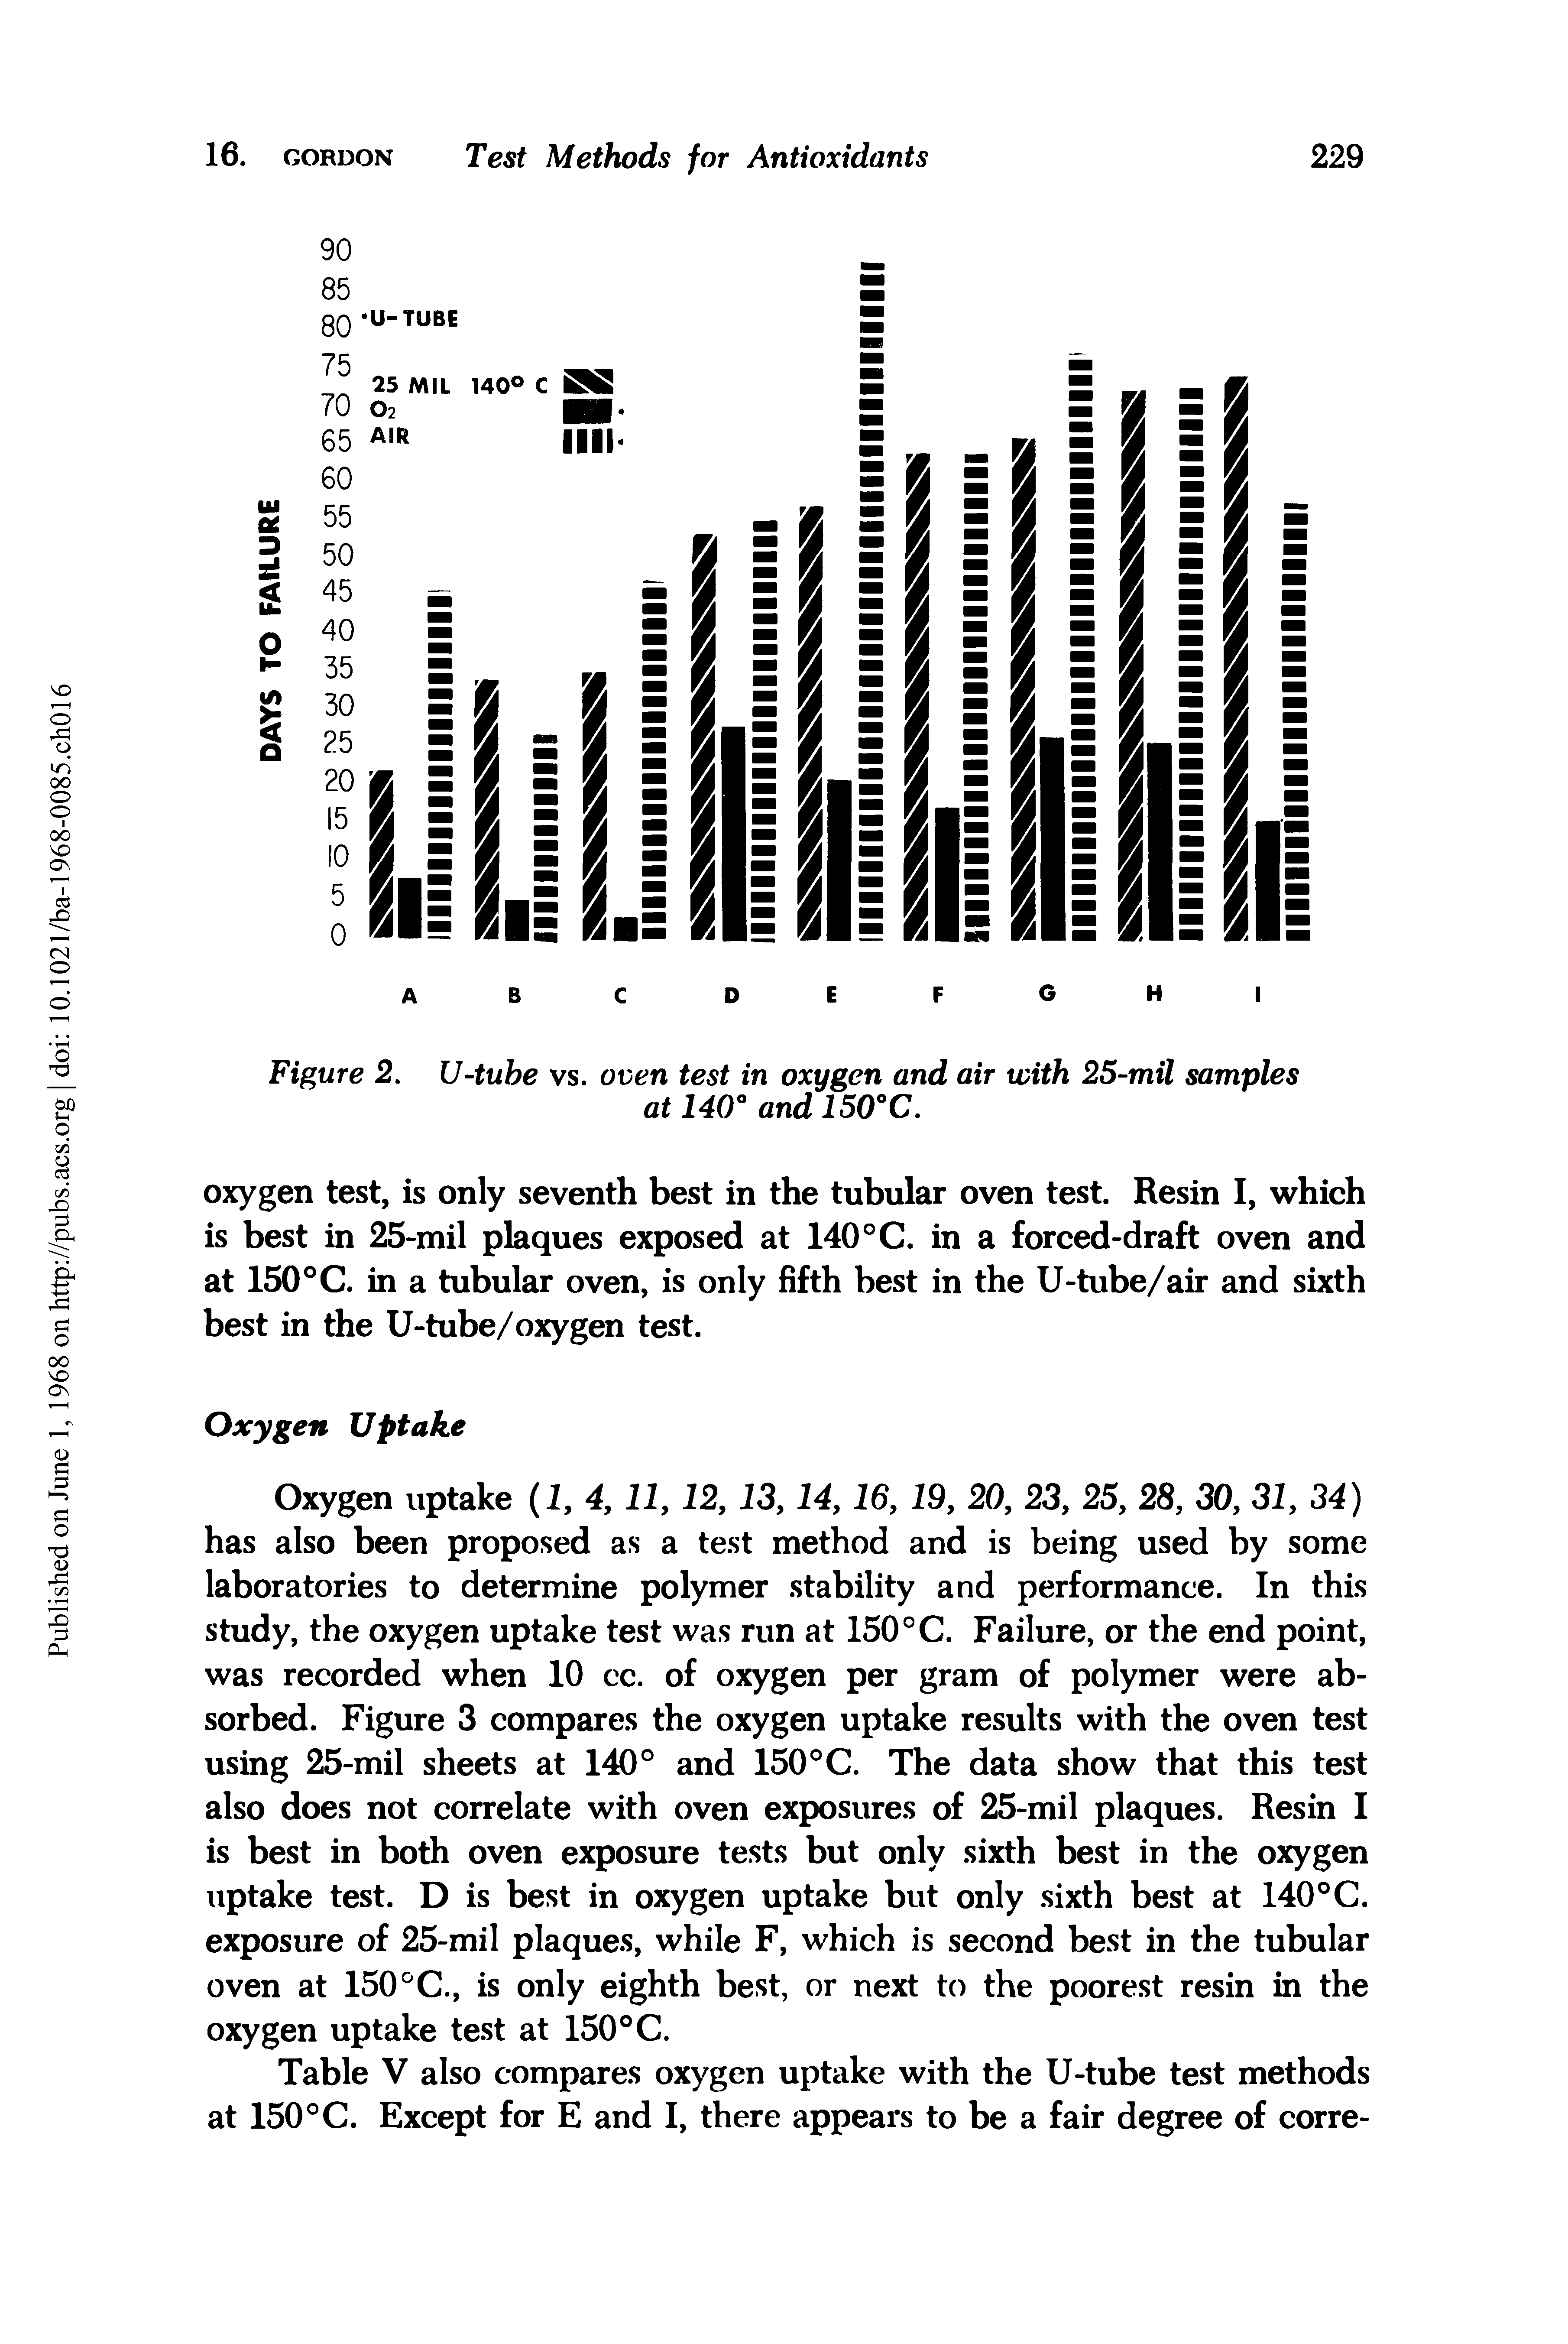 Figure 2. U-tuhe vs. oven test in oxygen and air with 25-mil samples at 140° and 150°C.